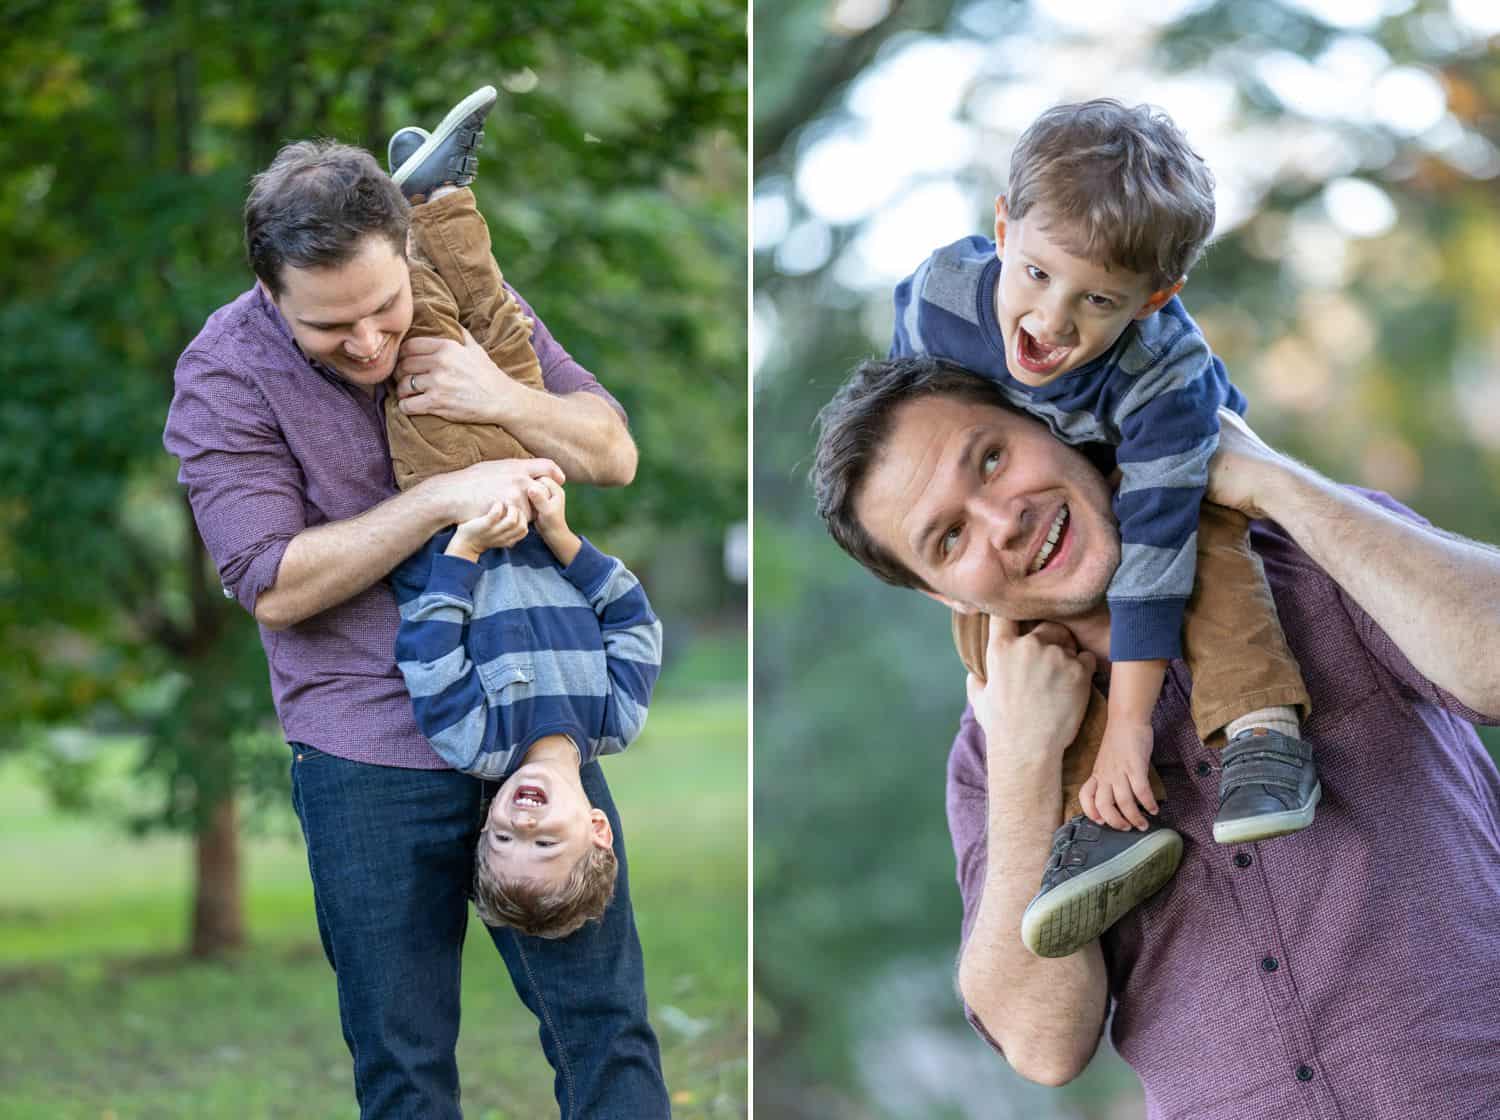 Series of dad playing in the park with his son.